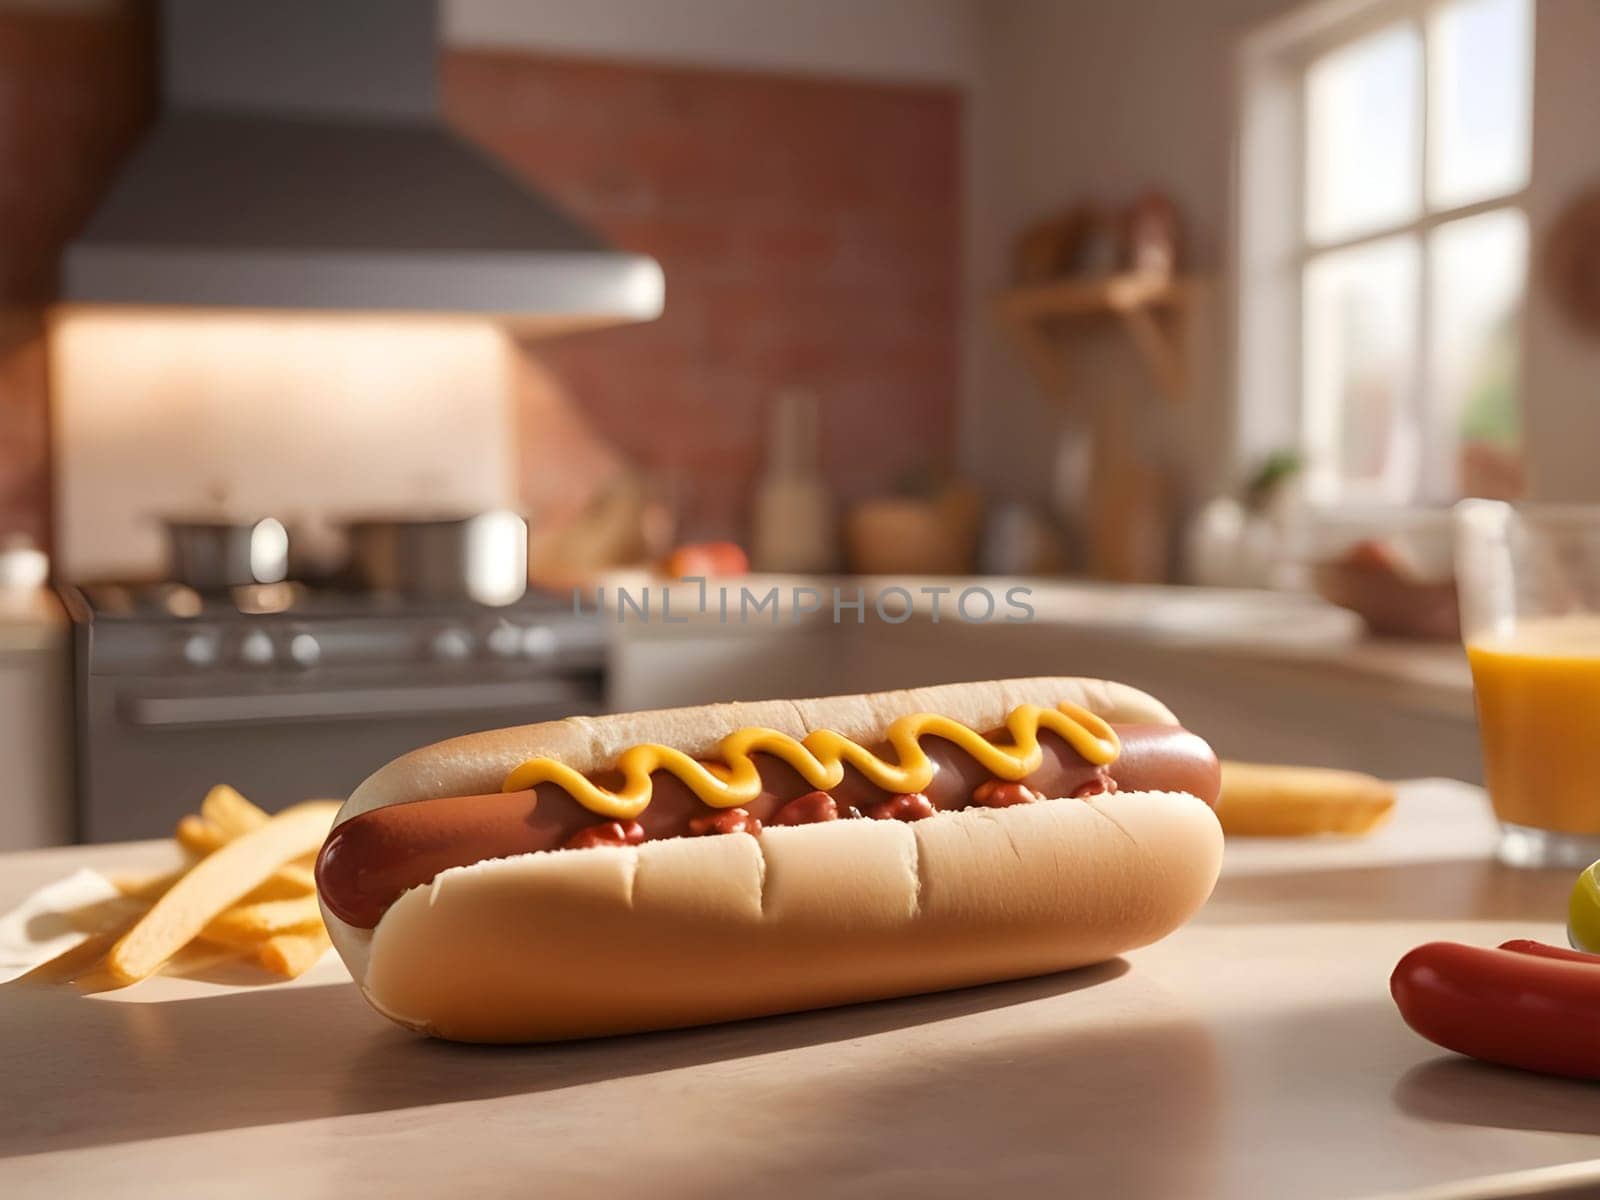 Sizzling Delight: Hot Dog Centerstage in a Sunlit, Cozy Kitchen by mailos